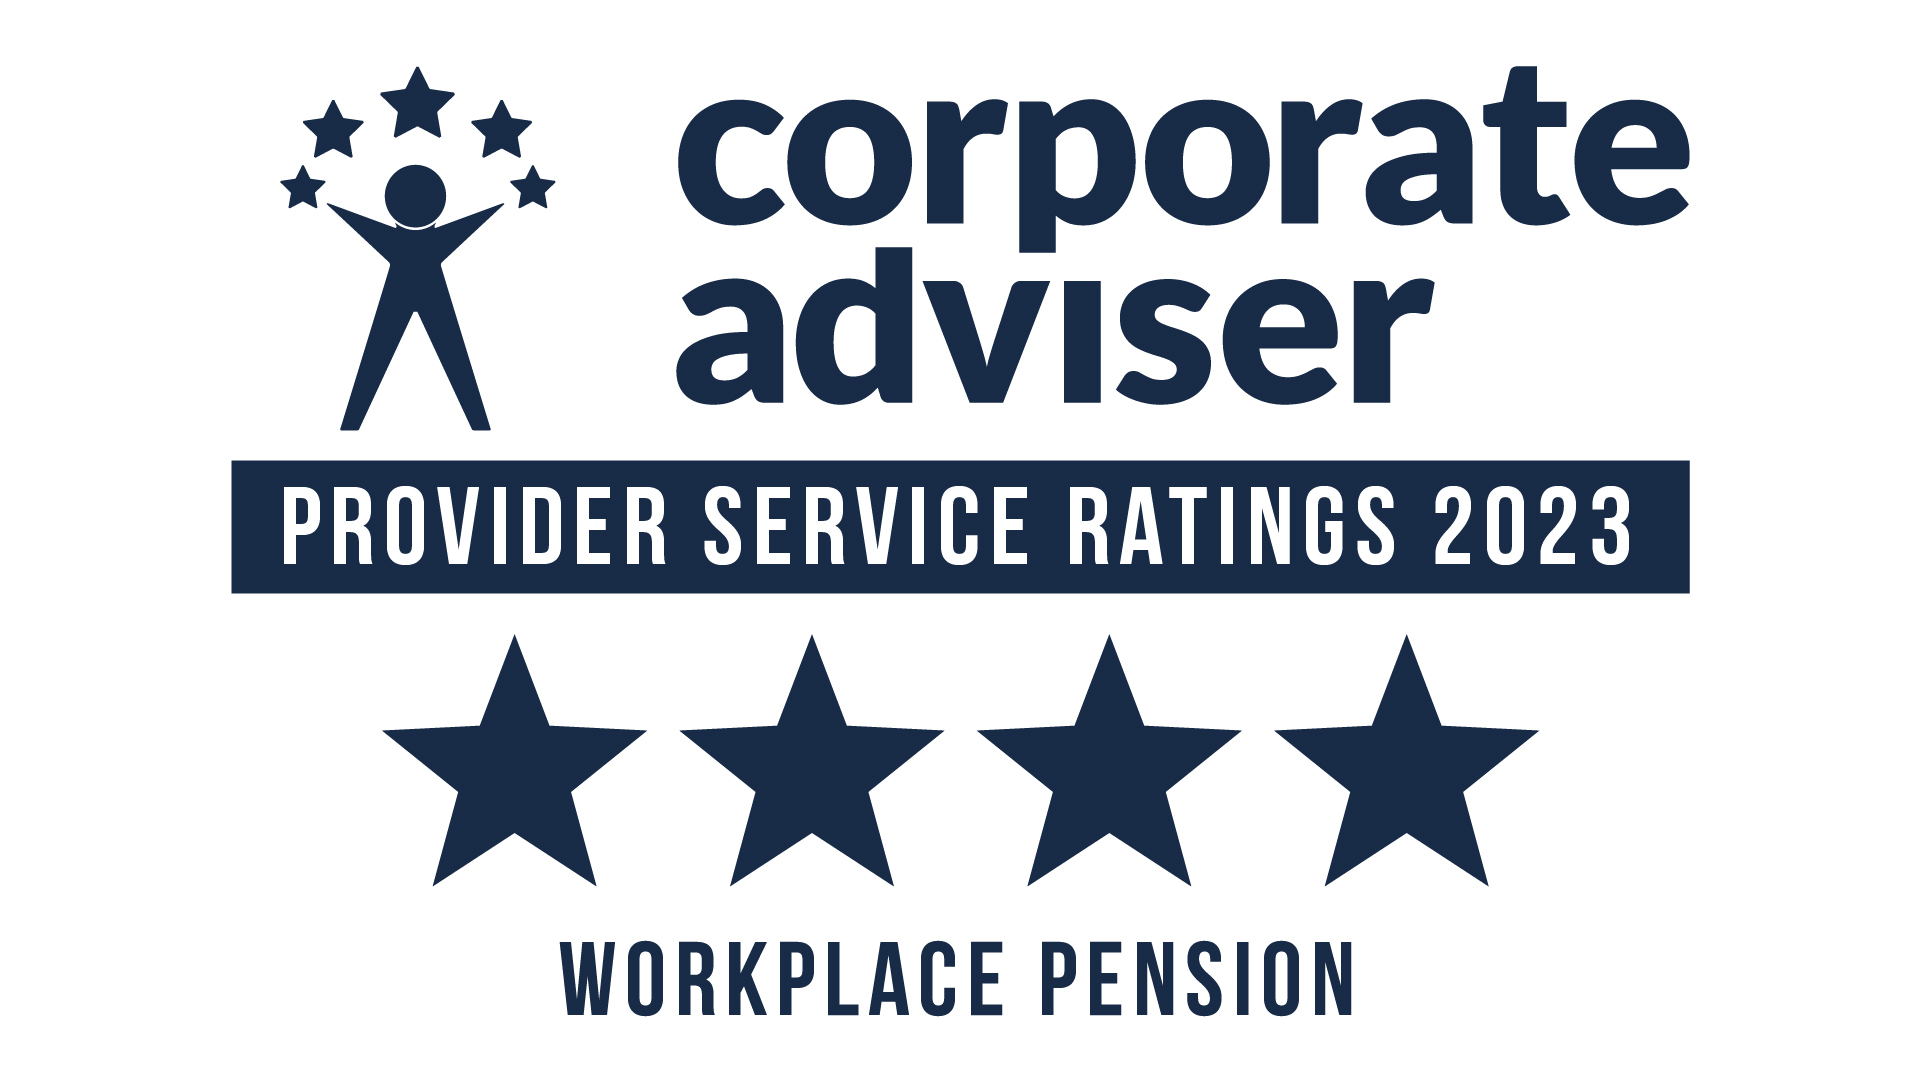 4 stars in the workplace pension category from the Corporate Adviser
                          Service Ratings Awards 2023